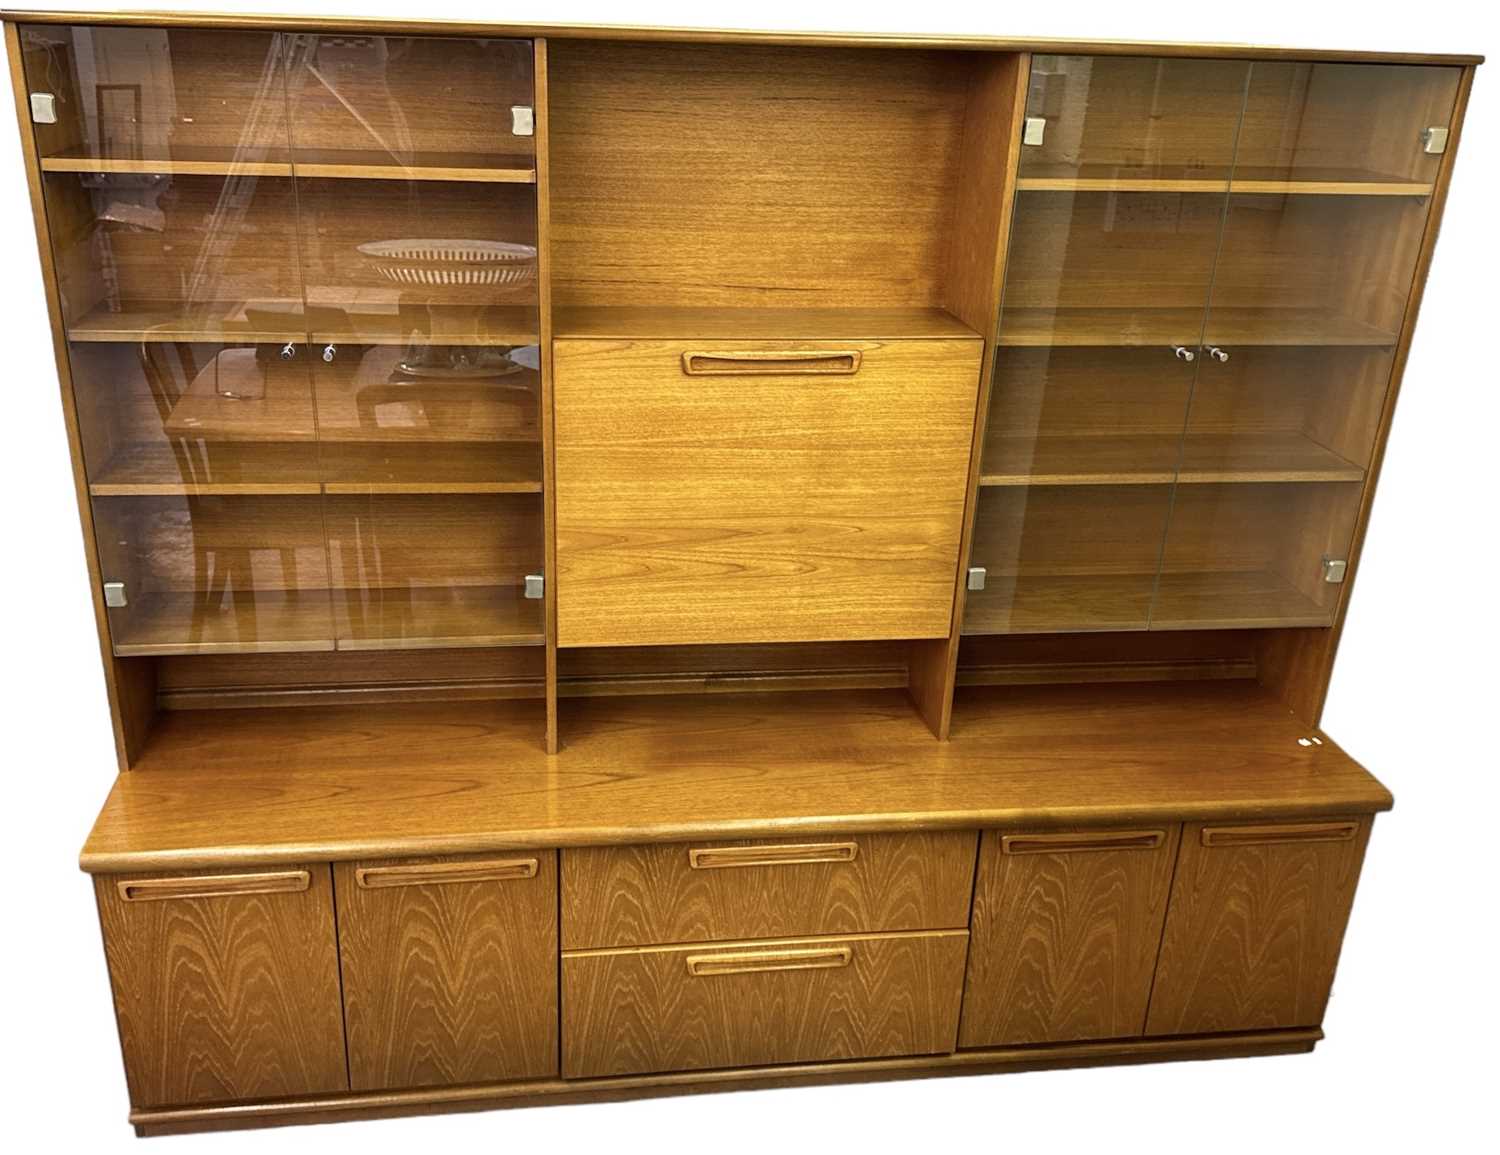 MEREDEW; a mid century teak wall unit, the pair of glazed cupboards flanking a central pull-down